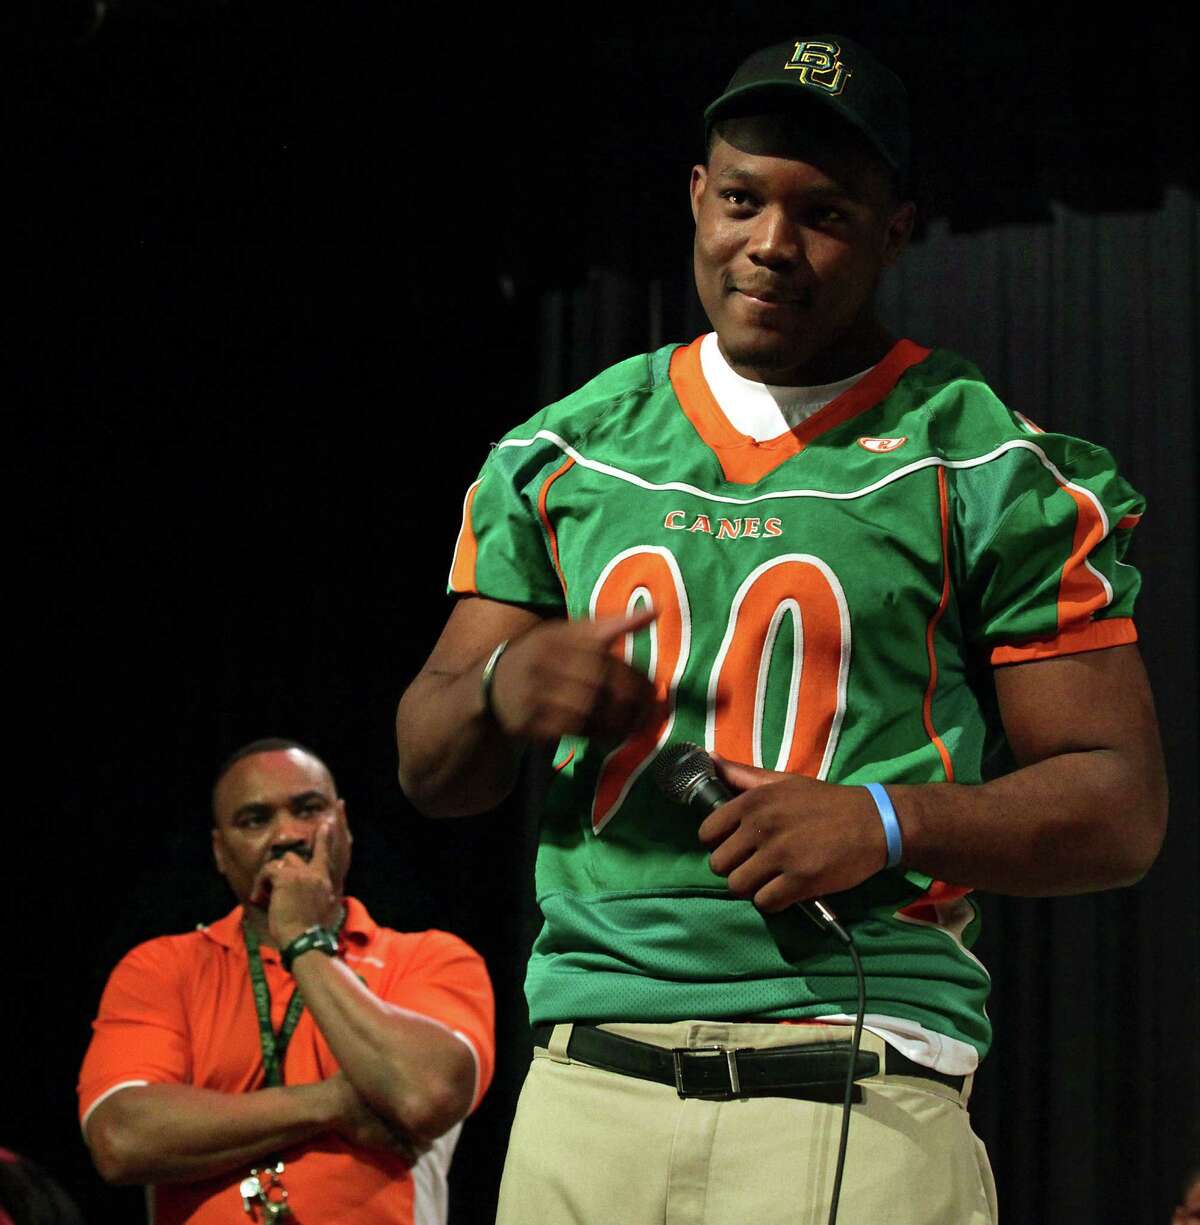 Javonte Magee speaks as Sam Houston Coach Gary Green listens in February 2012 just after Magee and several others signed with Baylor University.